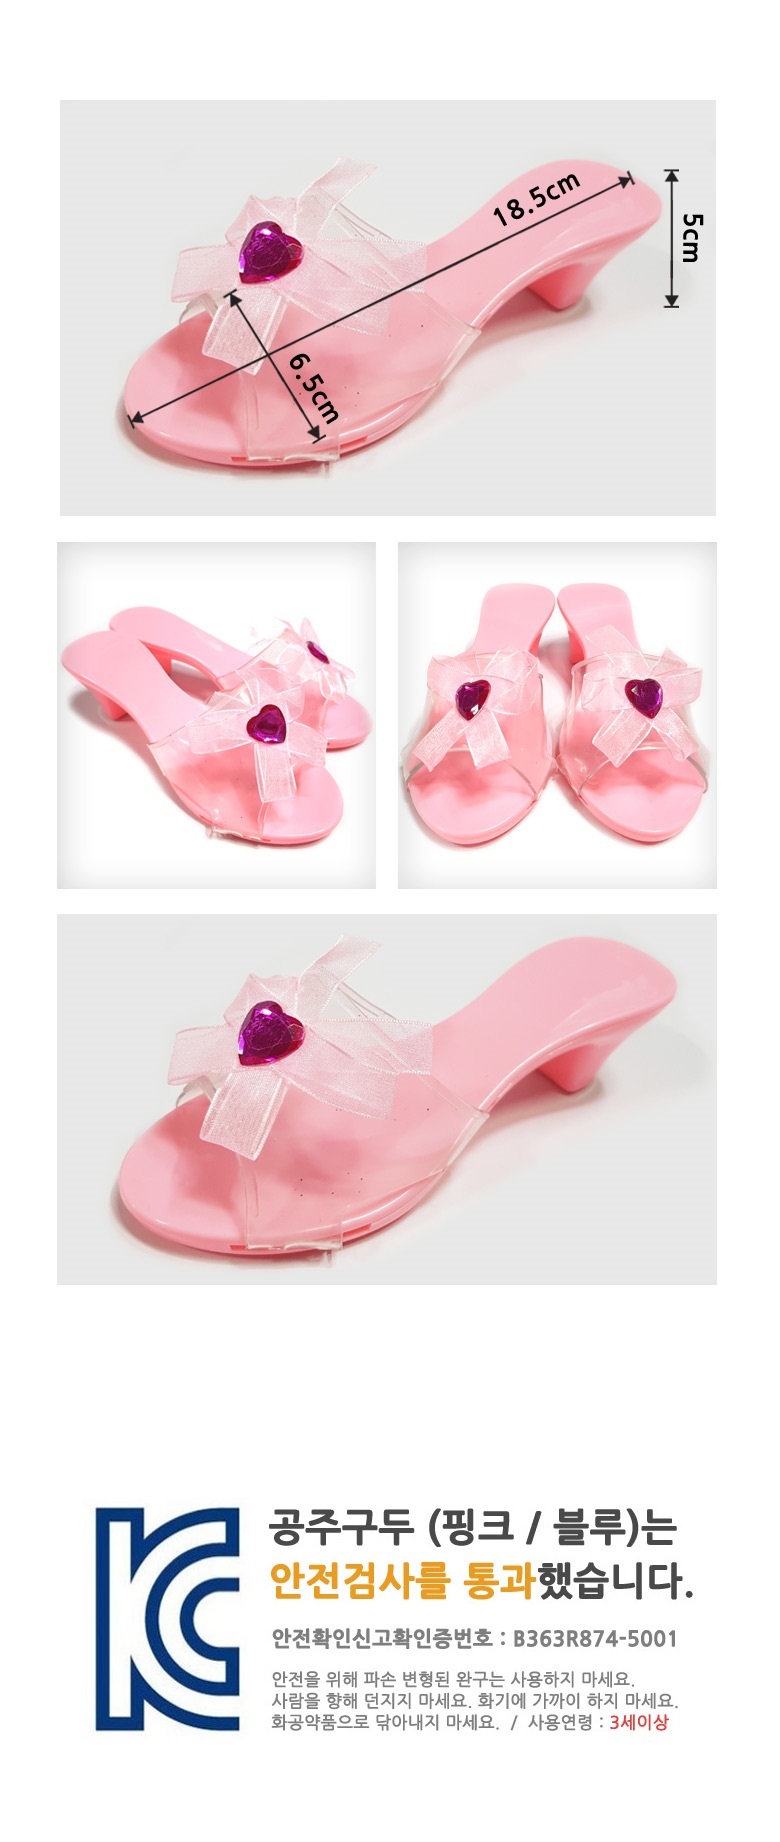 shoes_pink6000_2.jpg